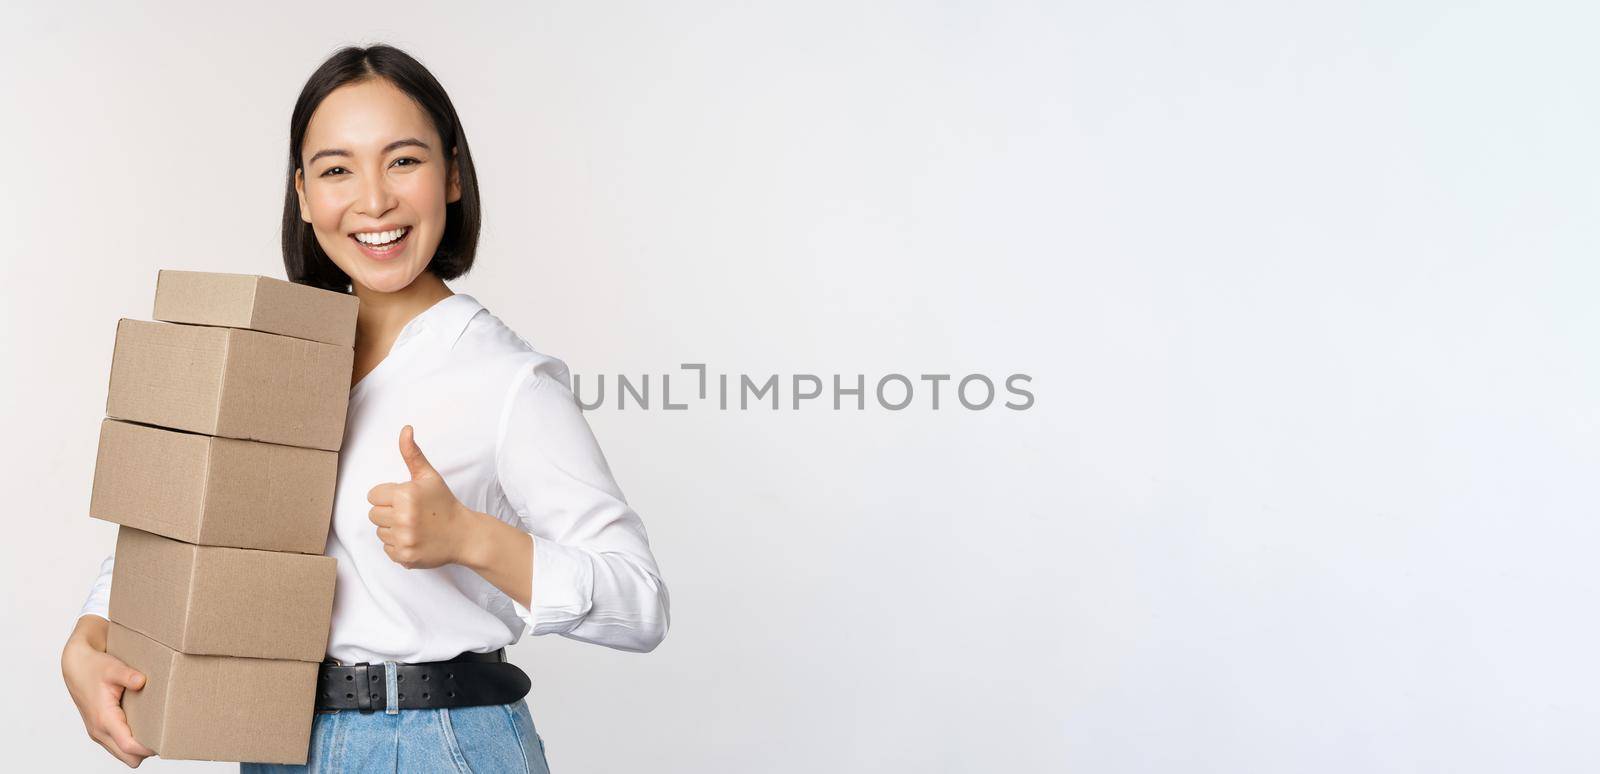 Image of happy modern asian woman showing thumbs up, holding boxes delivery goods, standing against white background.